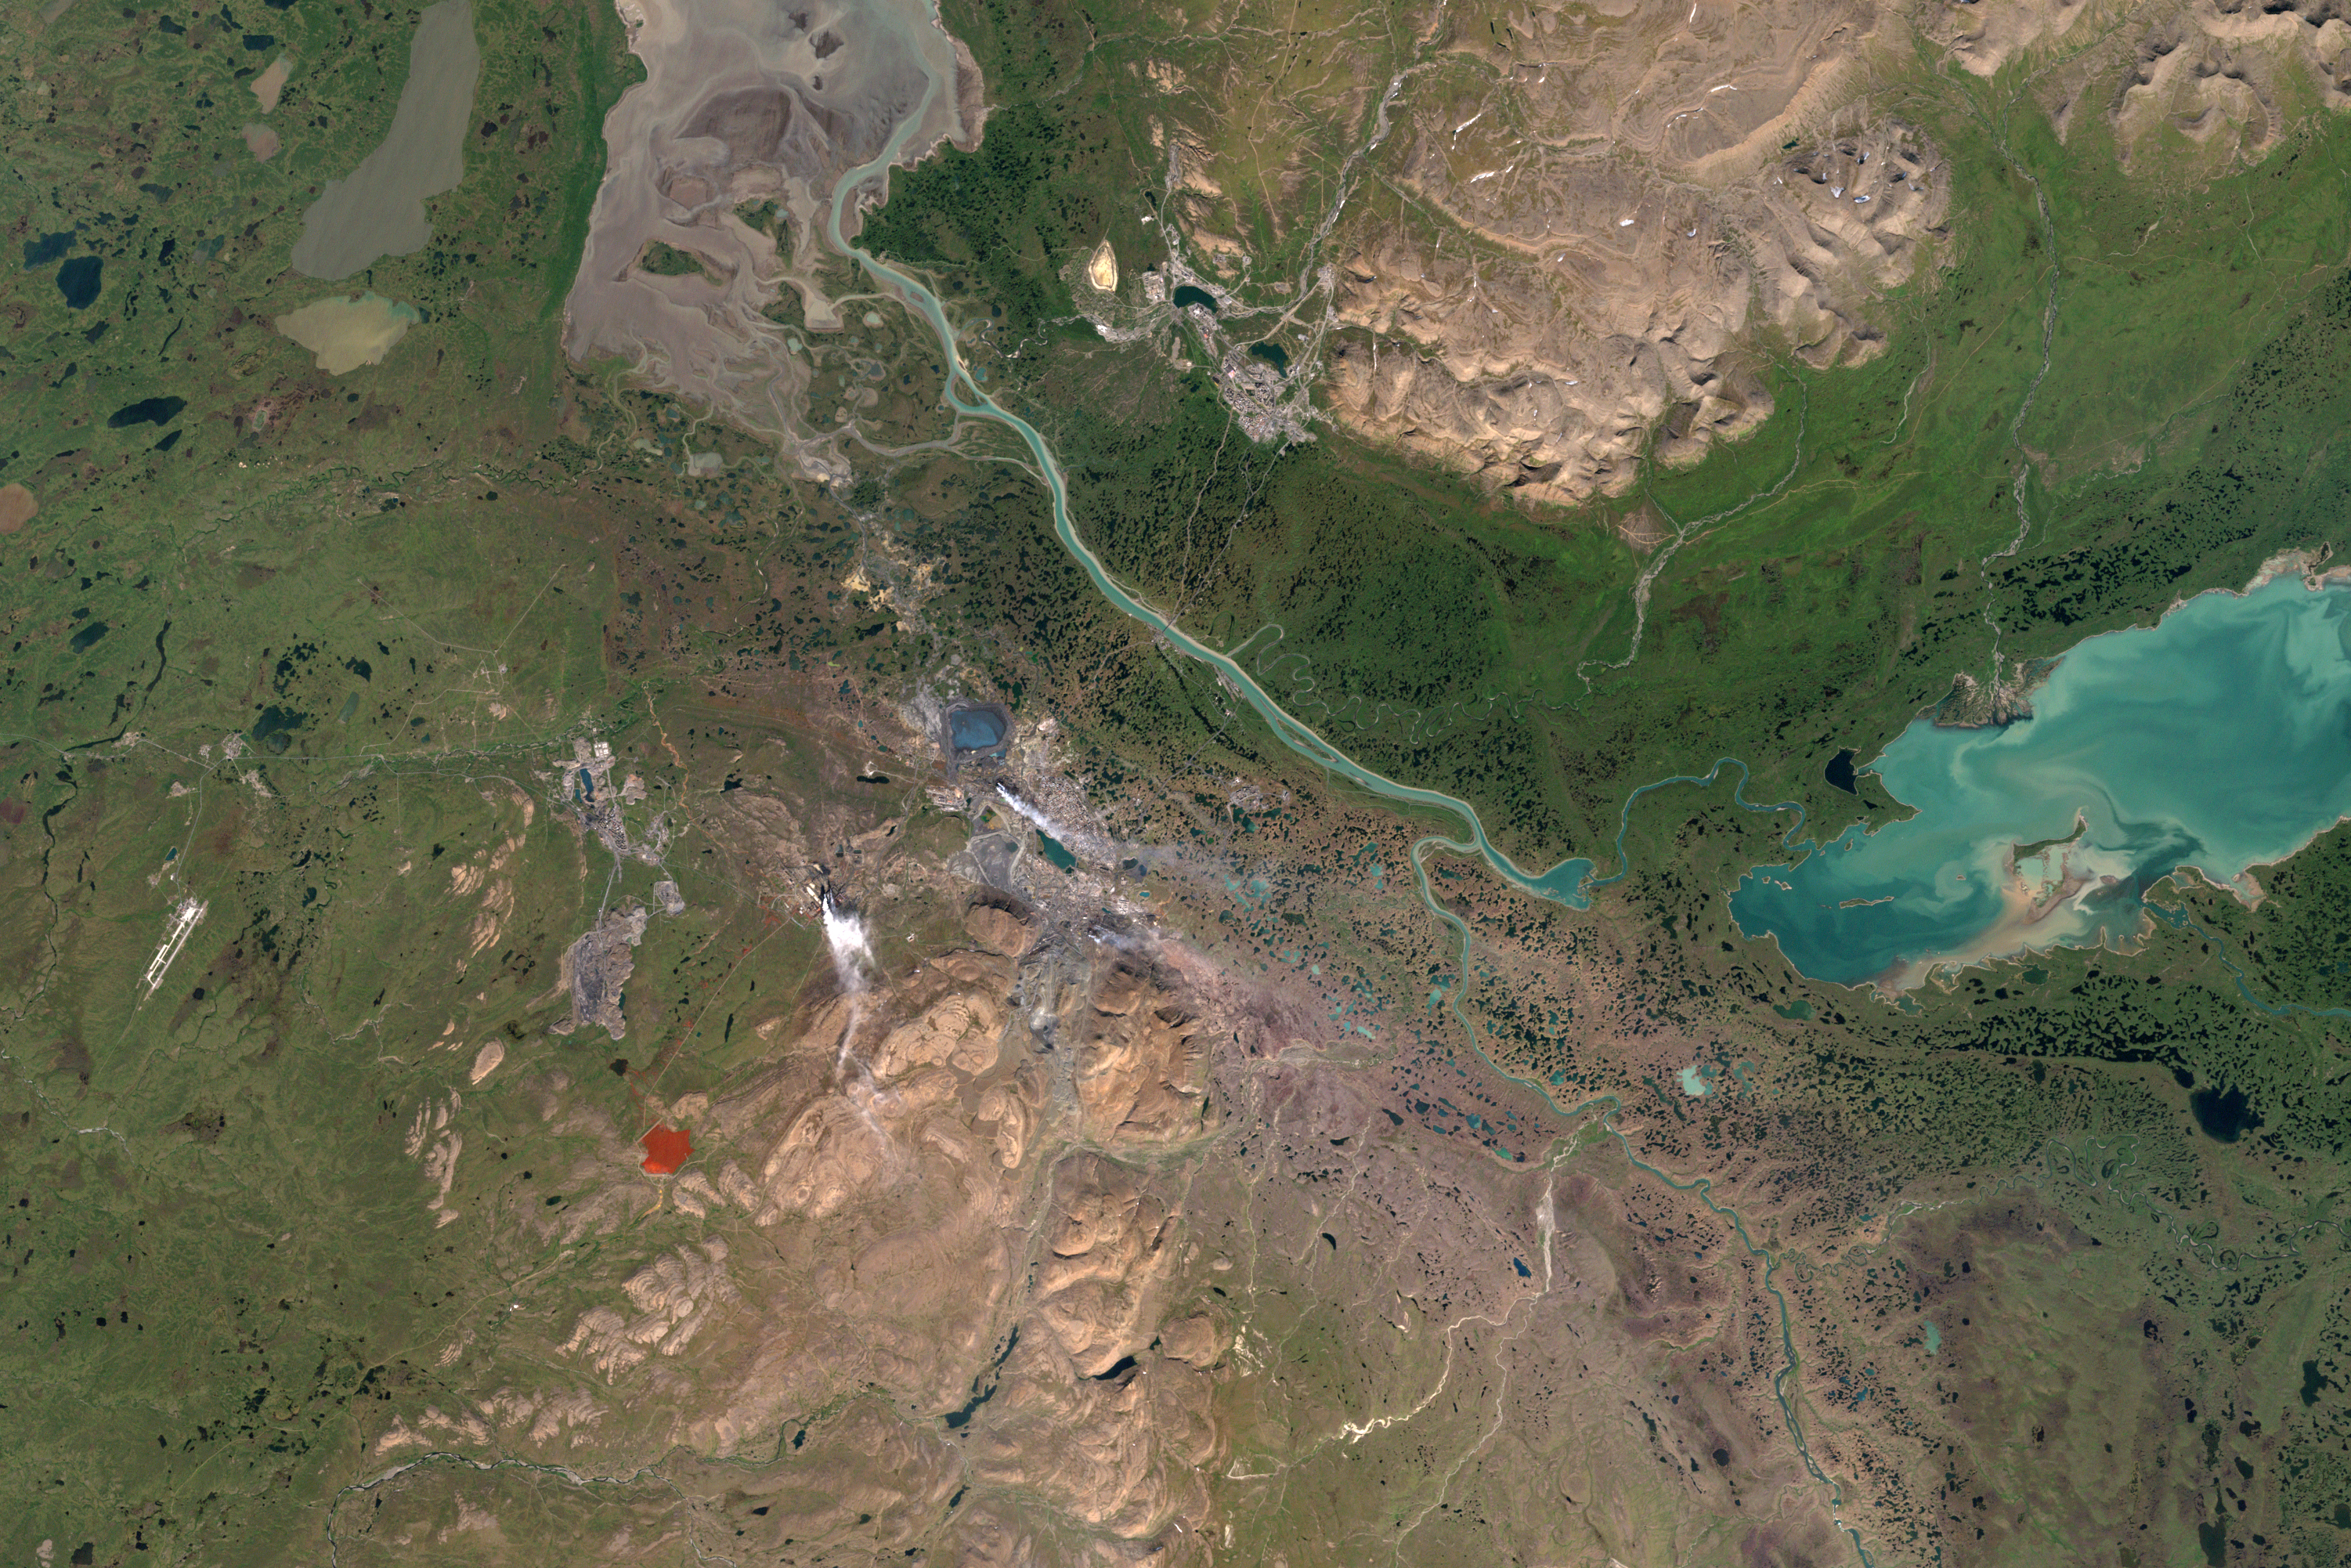 Siberian River Has Turned Red Before, Satellites Show - related image preview